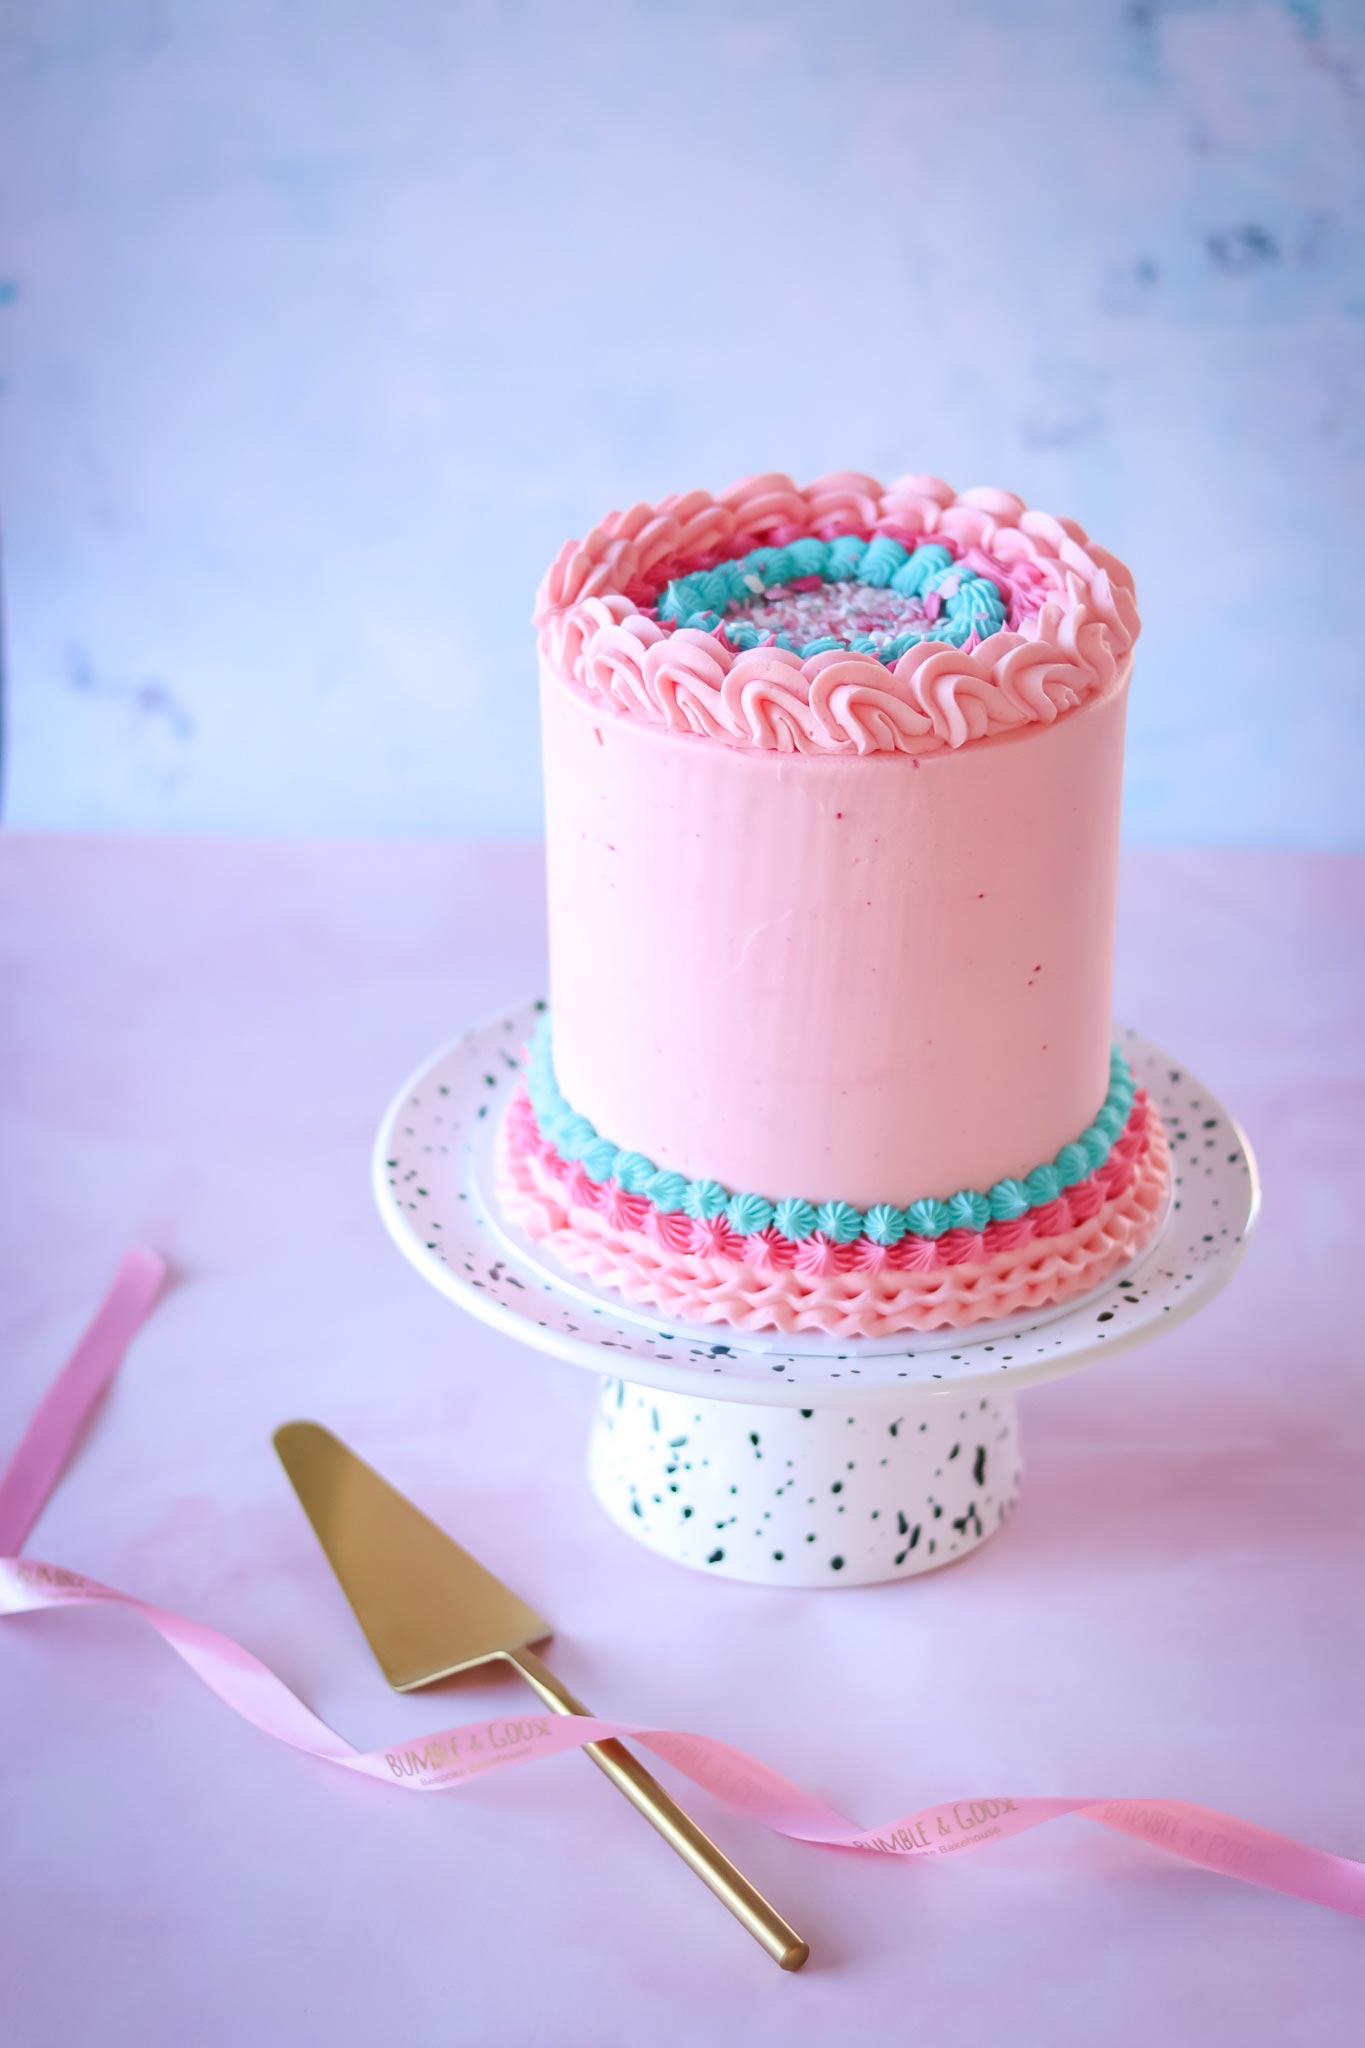 Luxury Buttercream Cake – The Dolly Cake Featured Image